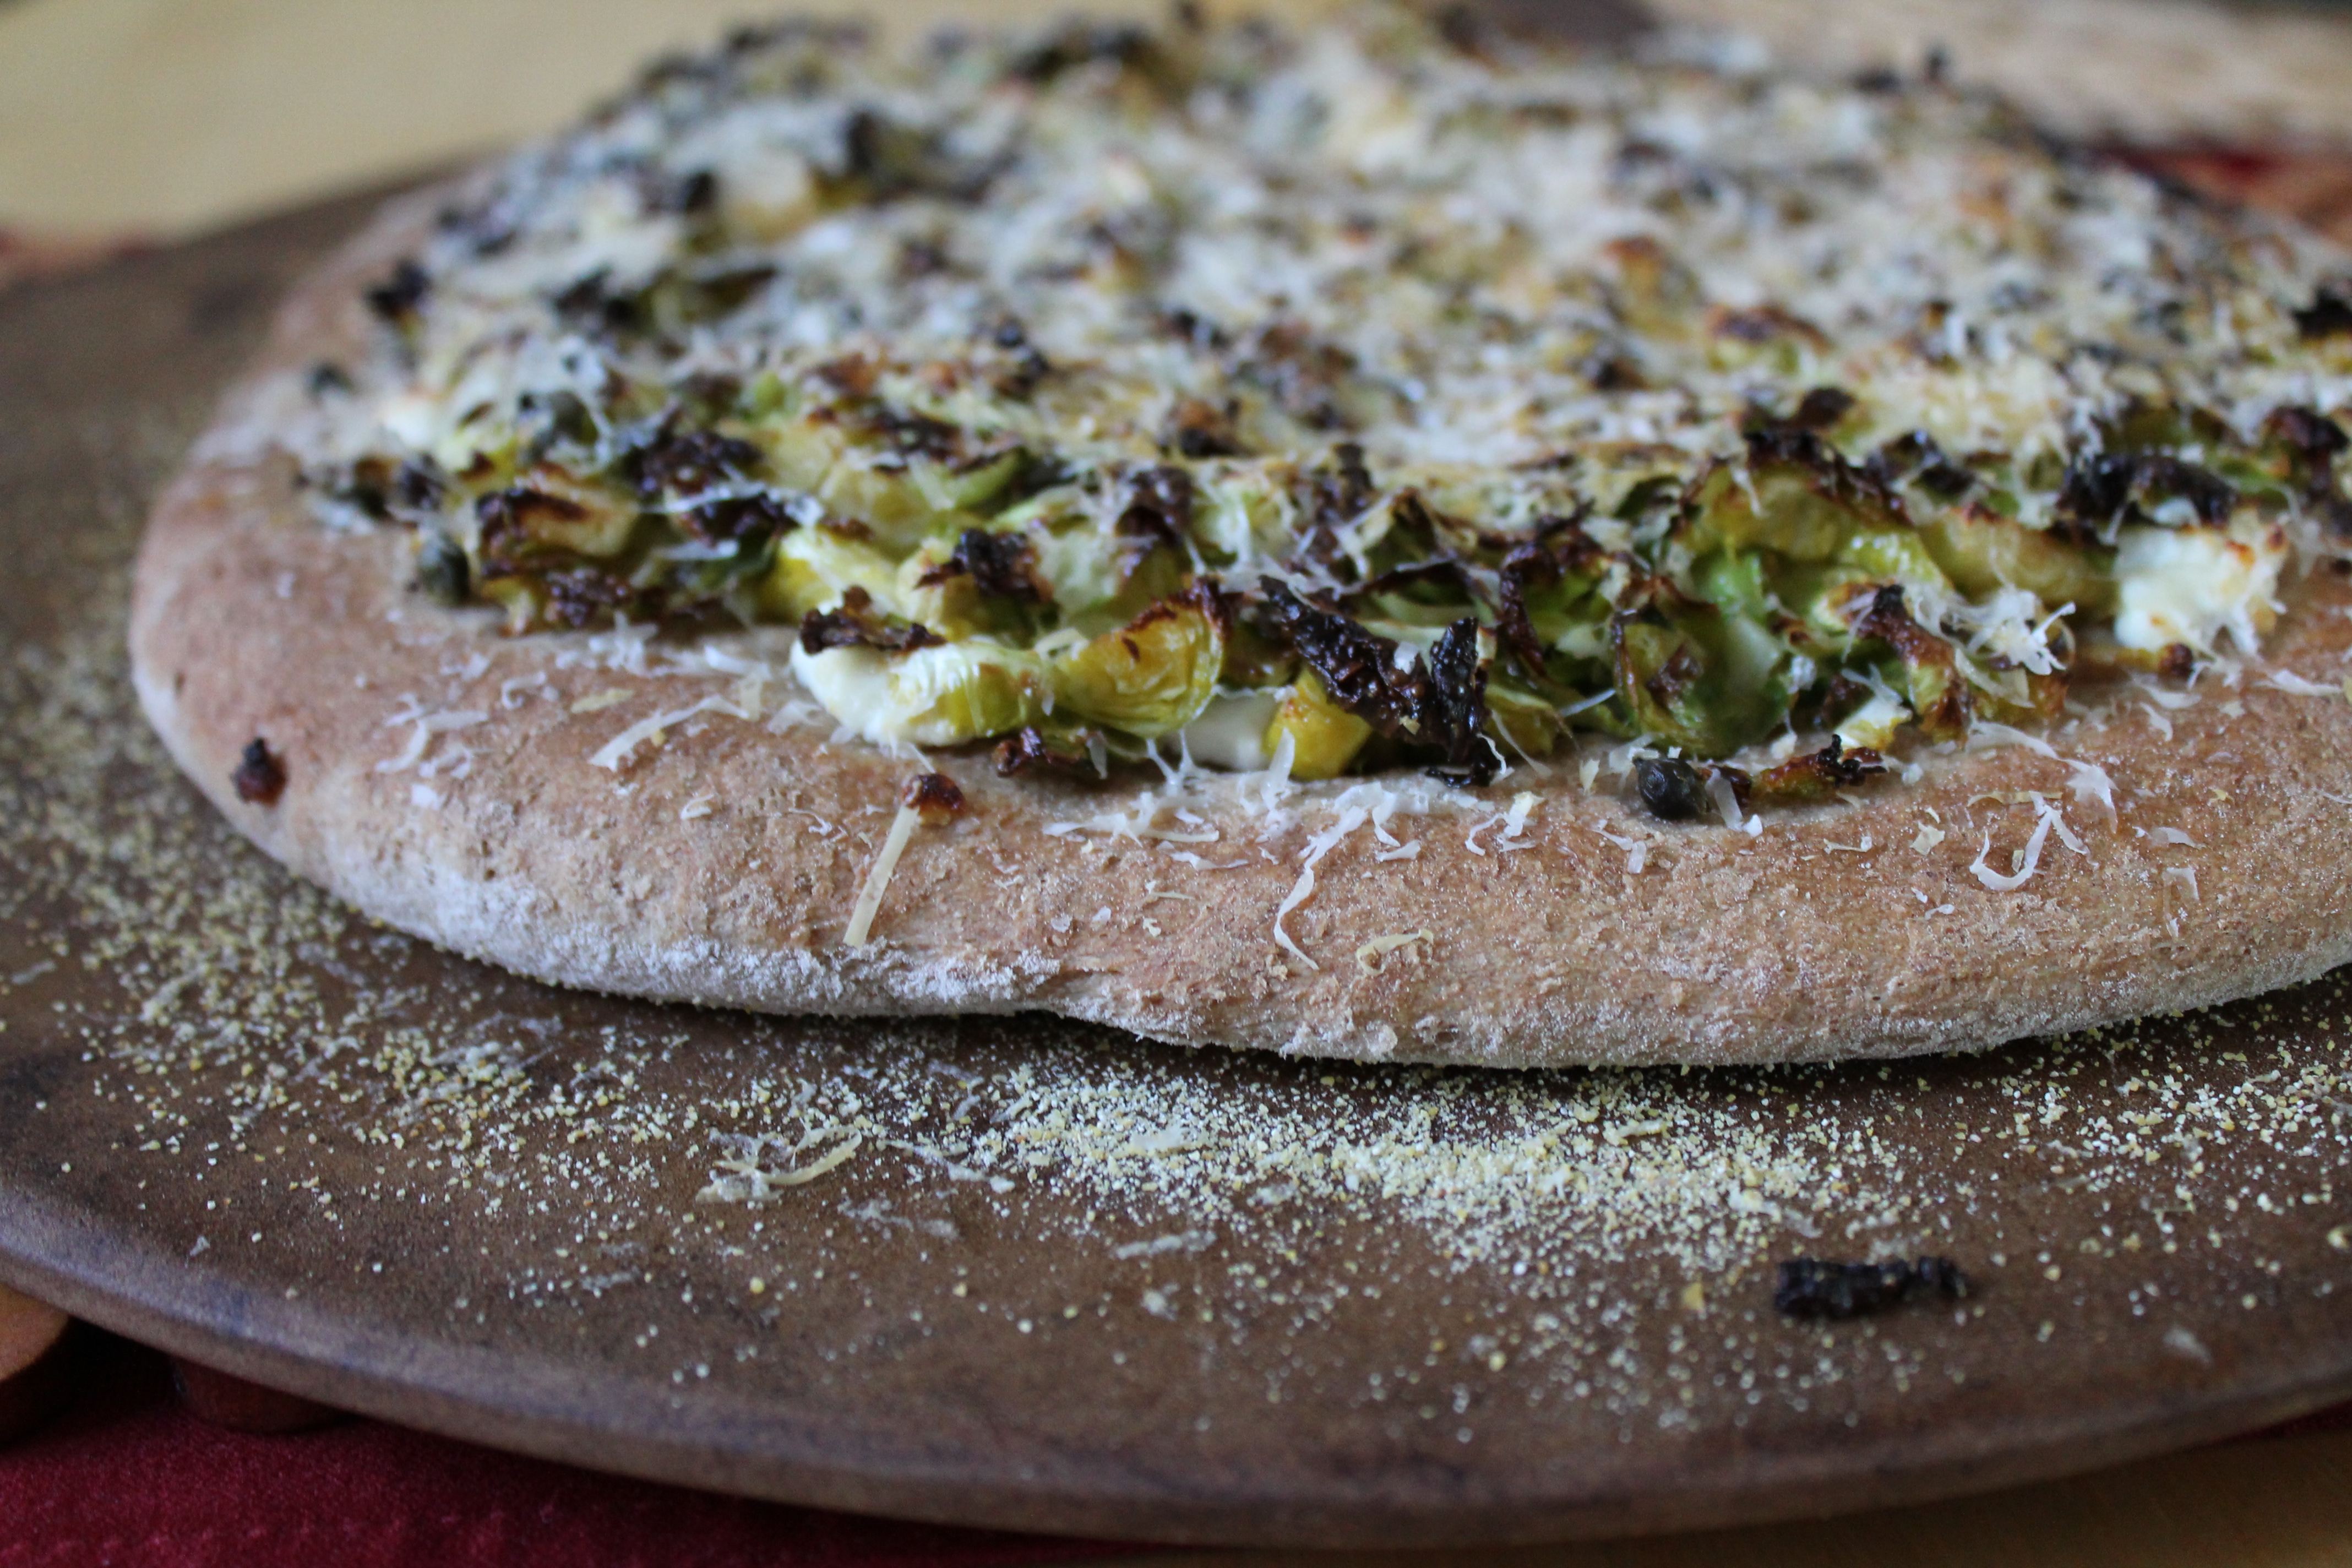 Brussels Sprouts and Capers Flatbread Pizza